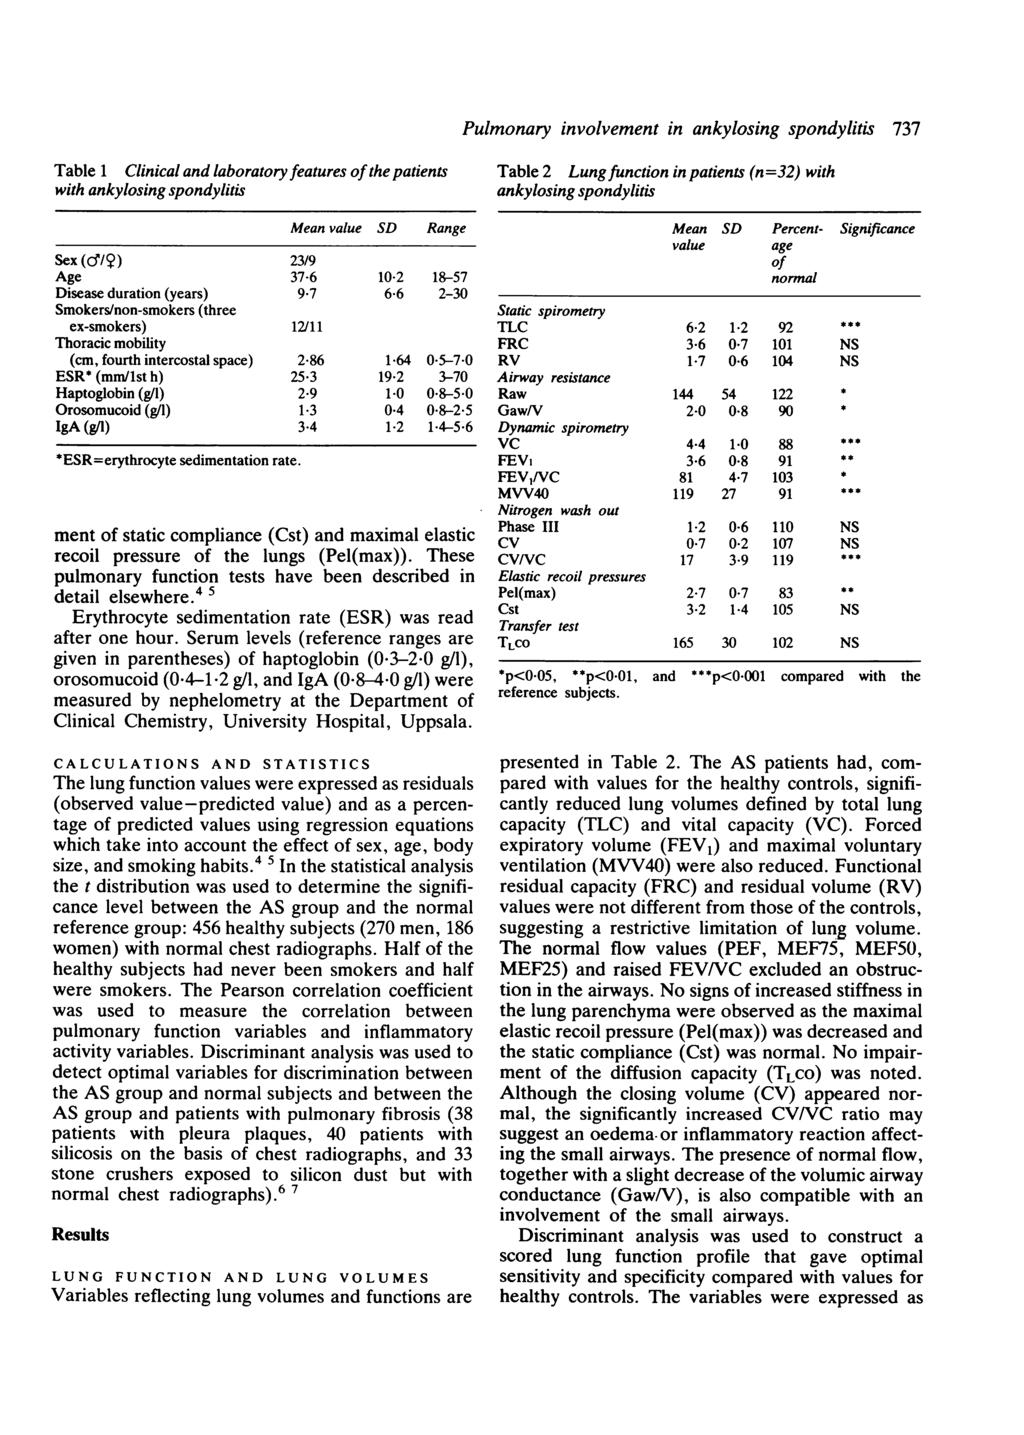 Table 1 Clinical and laboratory features of the patients with ankylosing spondylitis Mean value SD Range Sex (cili) 23/9 Age 37-6 1-2 18-57 Disease duration (years) 9-7 6-6 2-3 Smokers/non-smokers